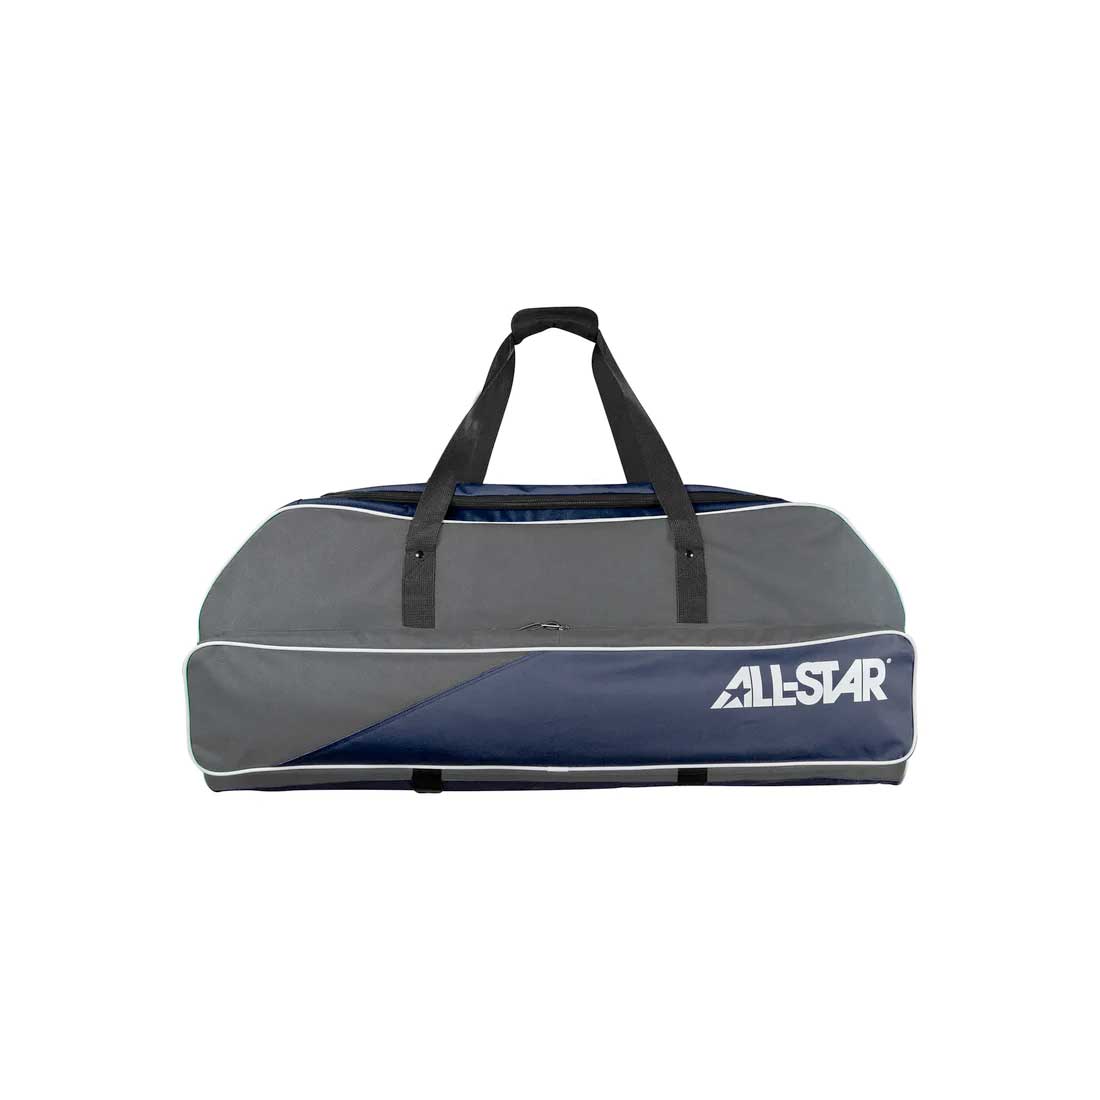 All-Star Player's Pro Carry Catcher's Bag